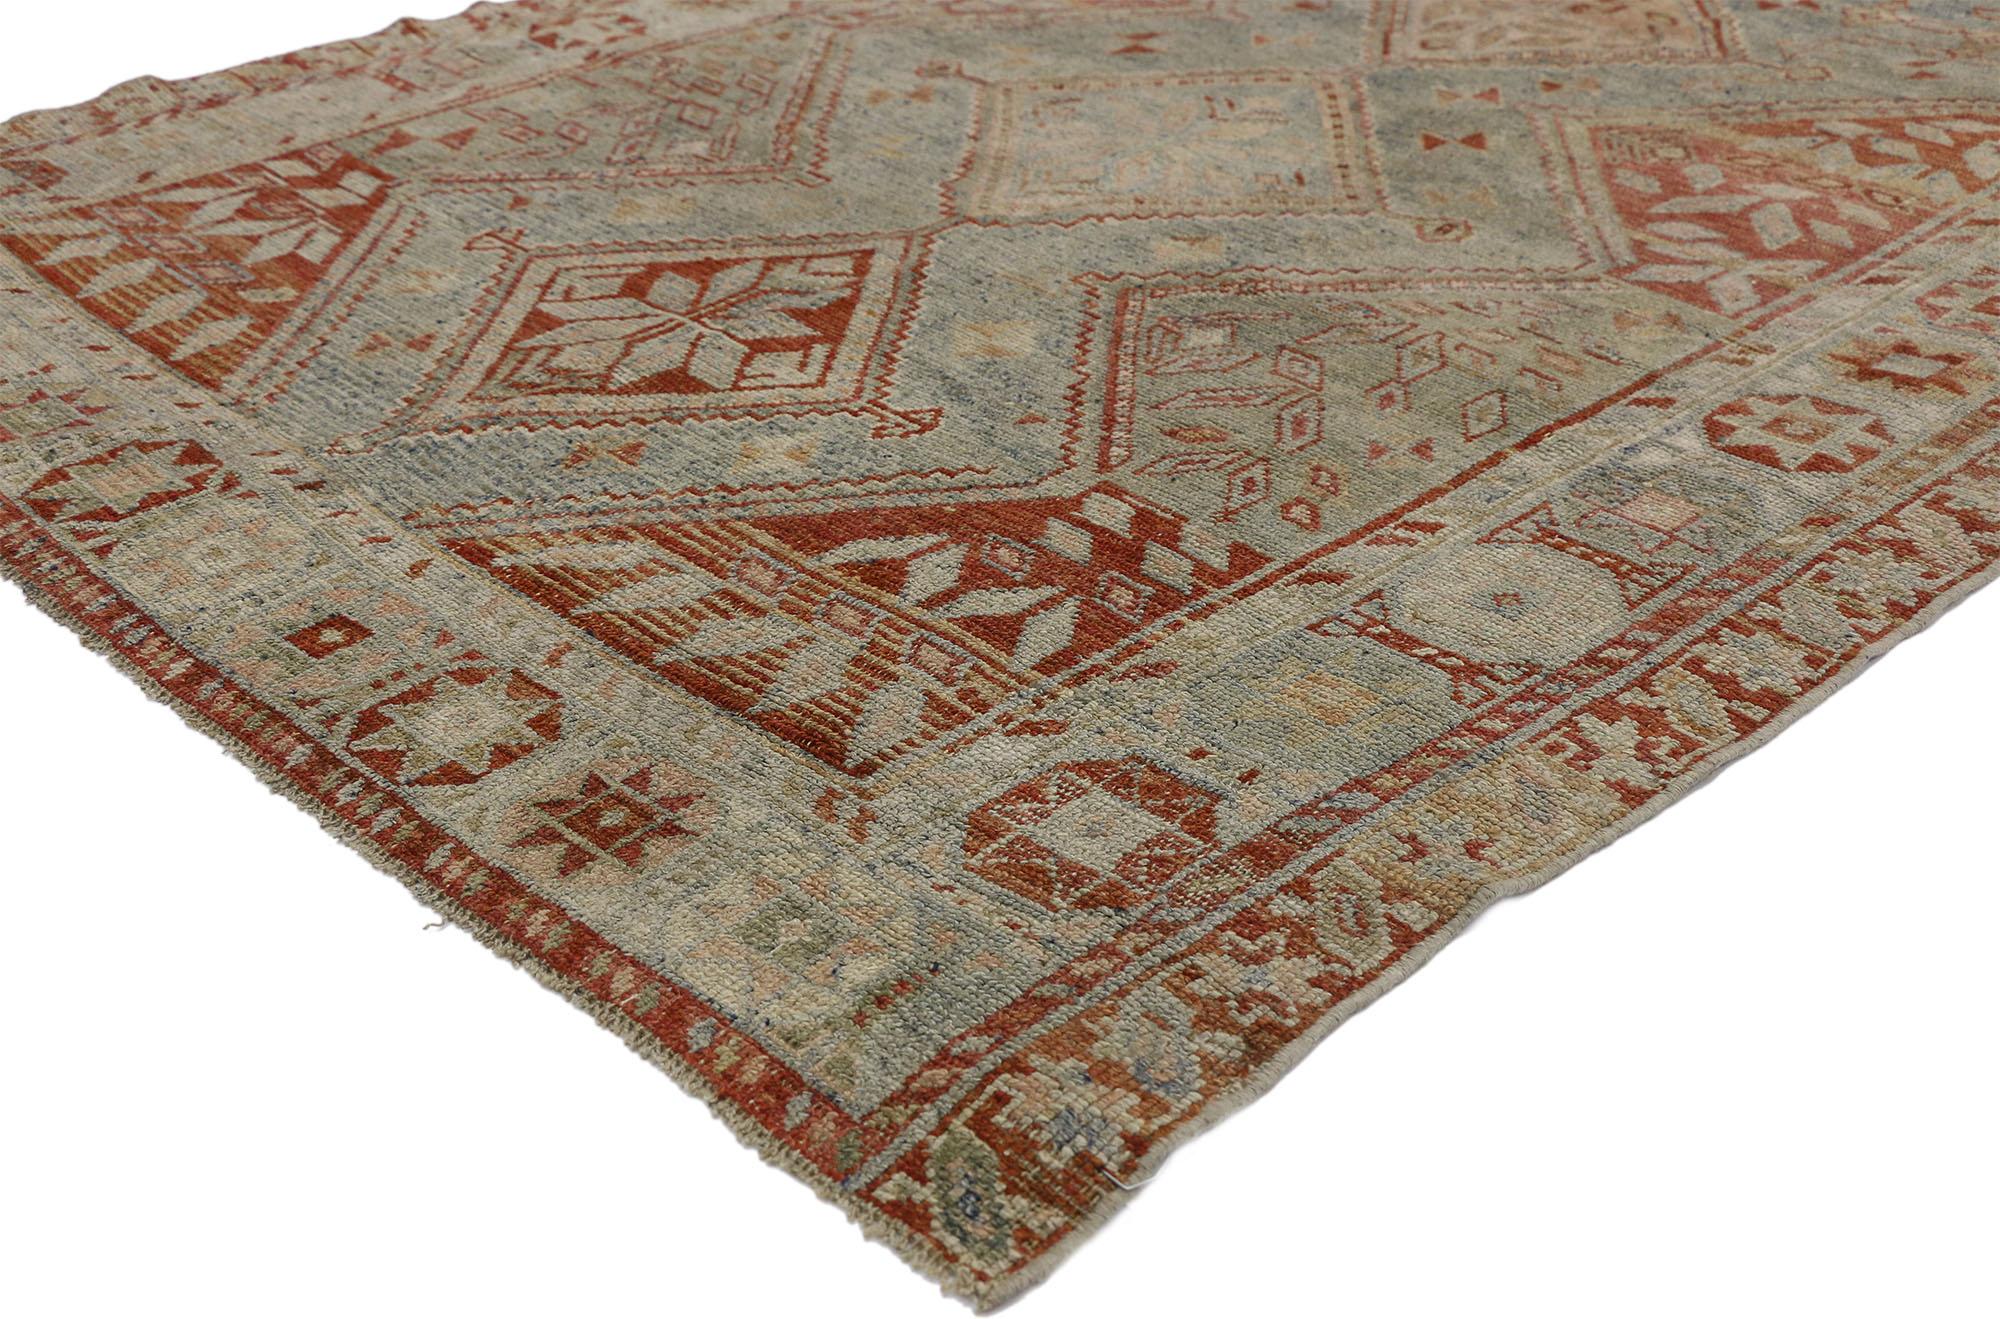 52455, antique Persian Shiraz rug with Subtle Bungalow style. This hand knotted wool antique Persian Shiraz rug features a subtly bungalow style with a diamond pattern in gradated, muted blues and bright red hues. A stacked pole medallion of